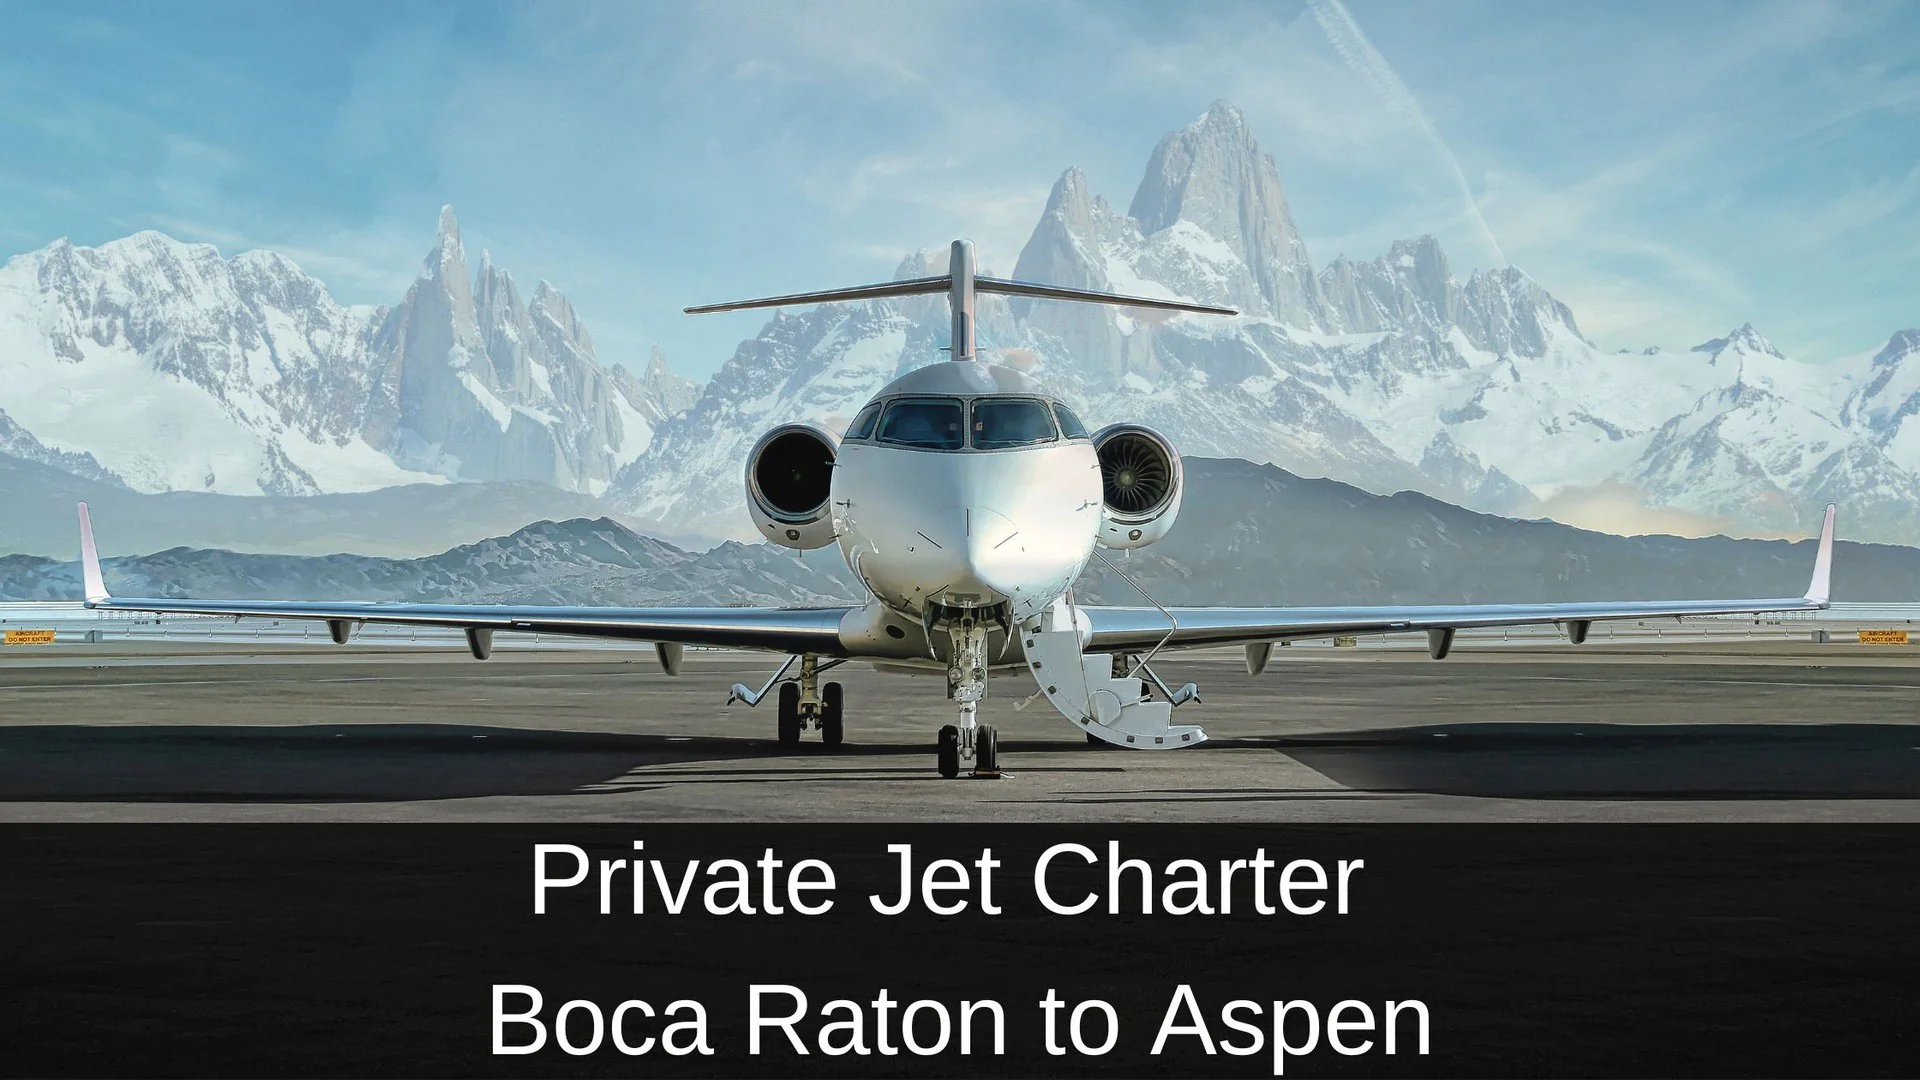 Private Jet Charter from Boca Raton to Aspen